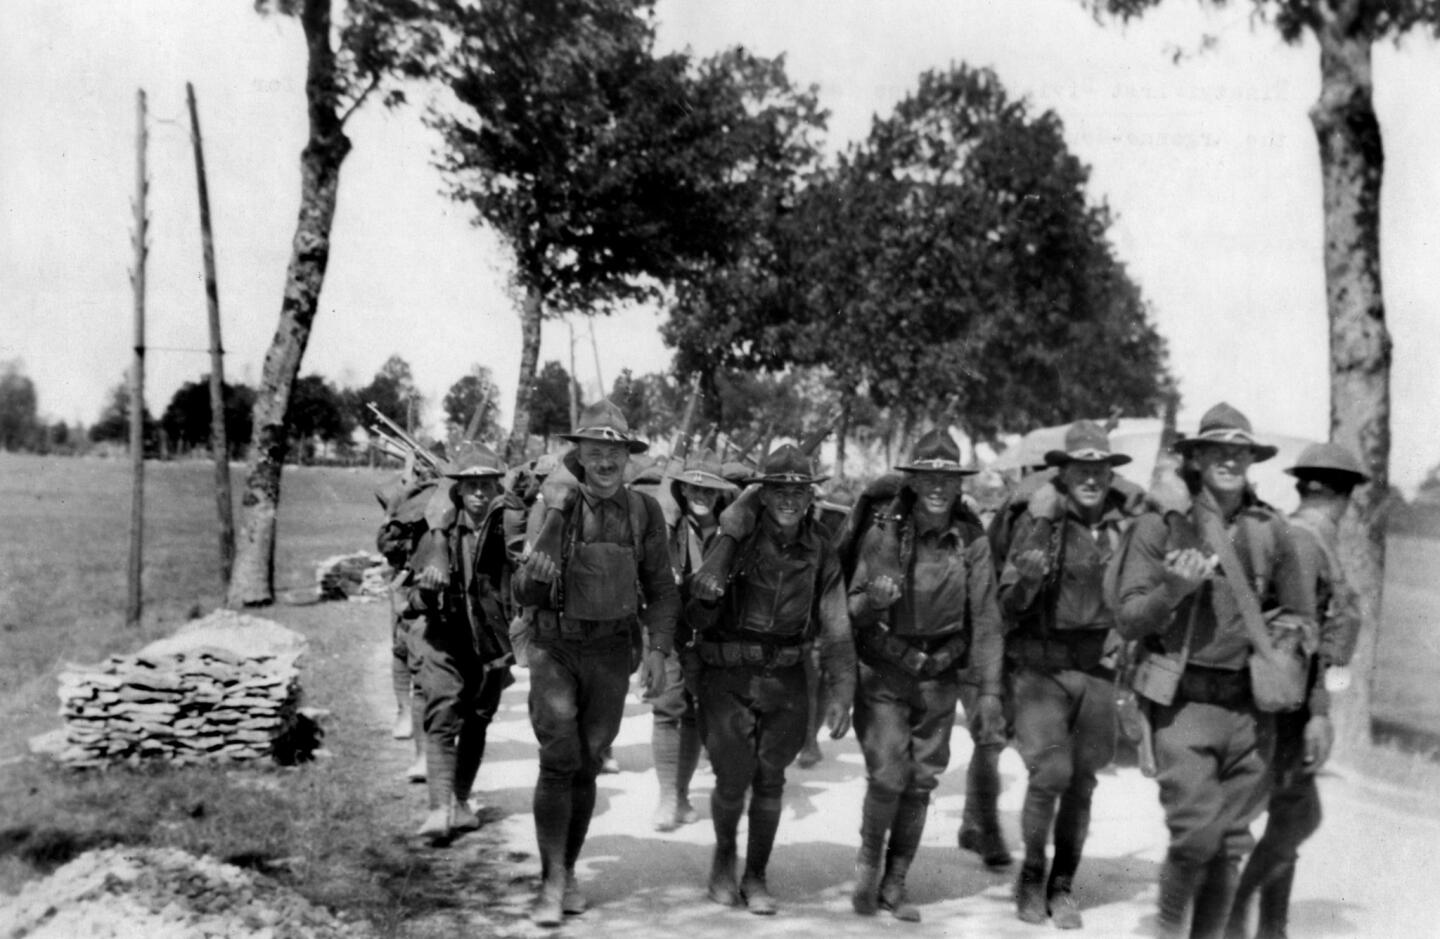 Members of the 91st Infrantry Division